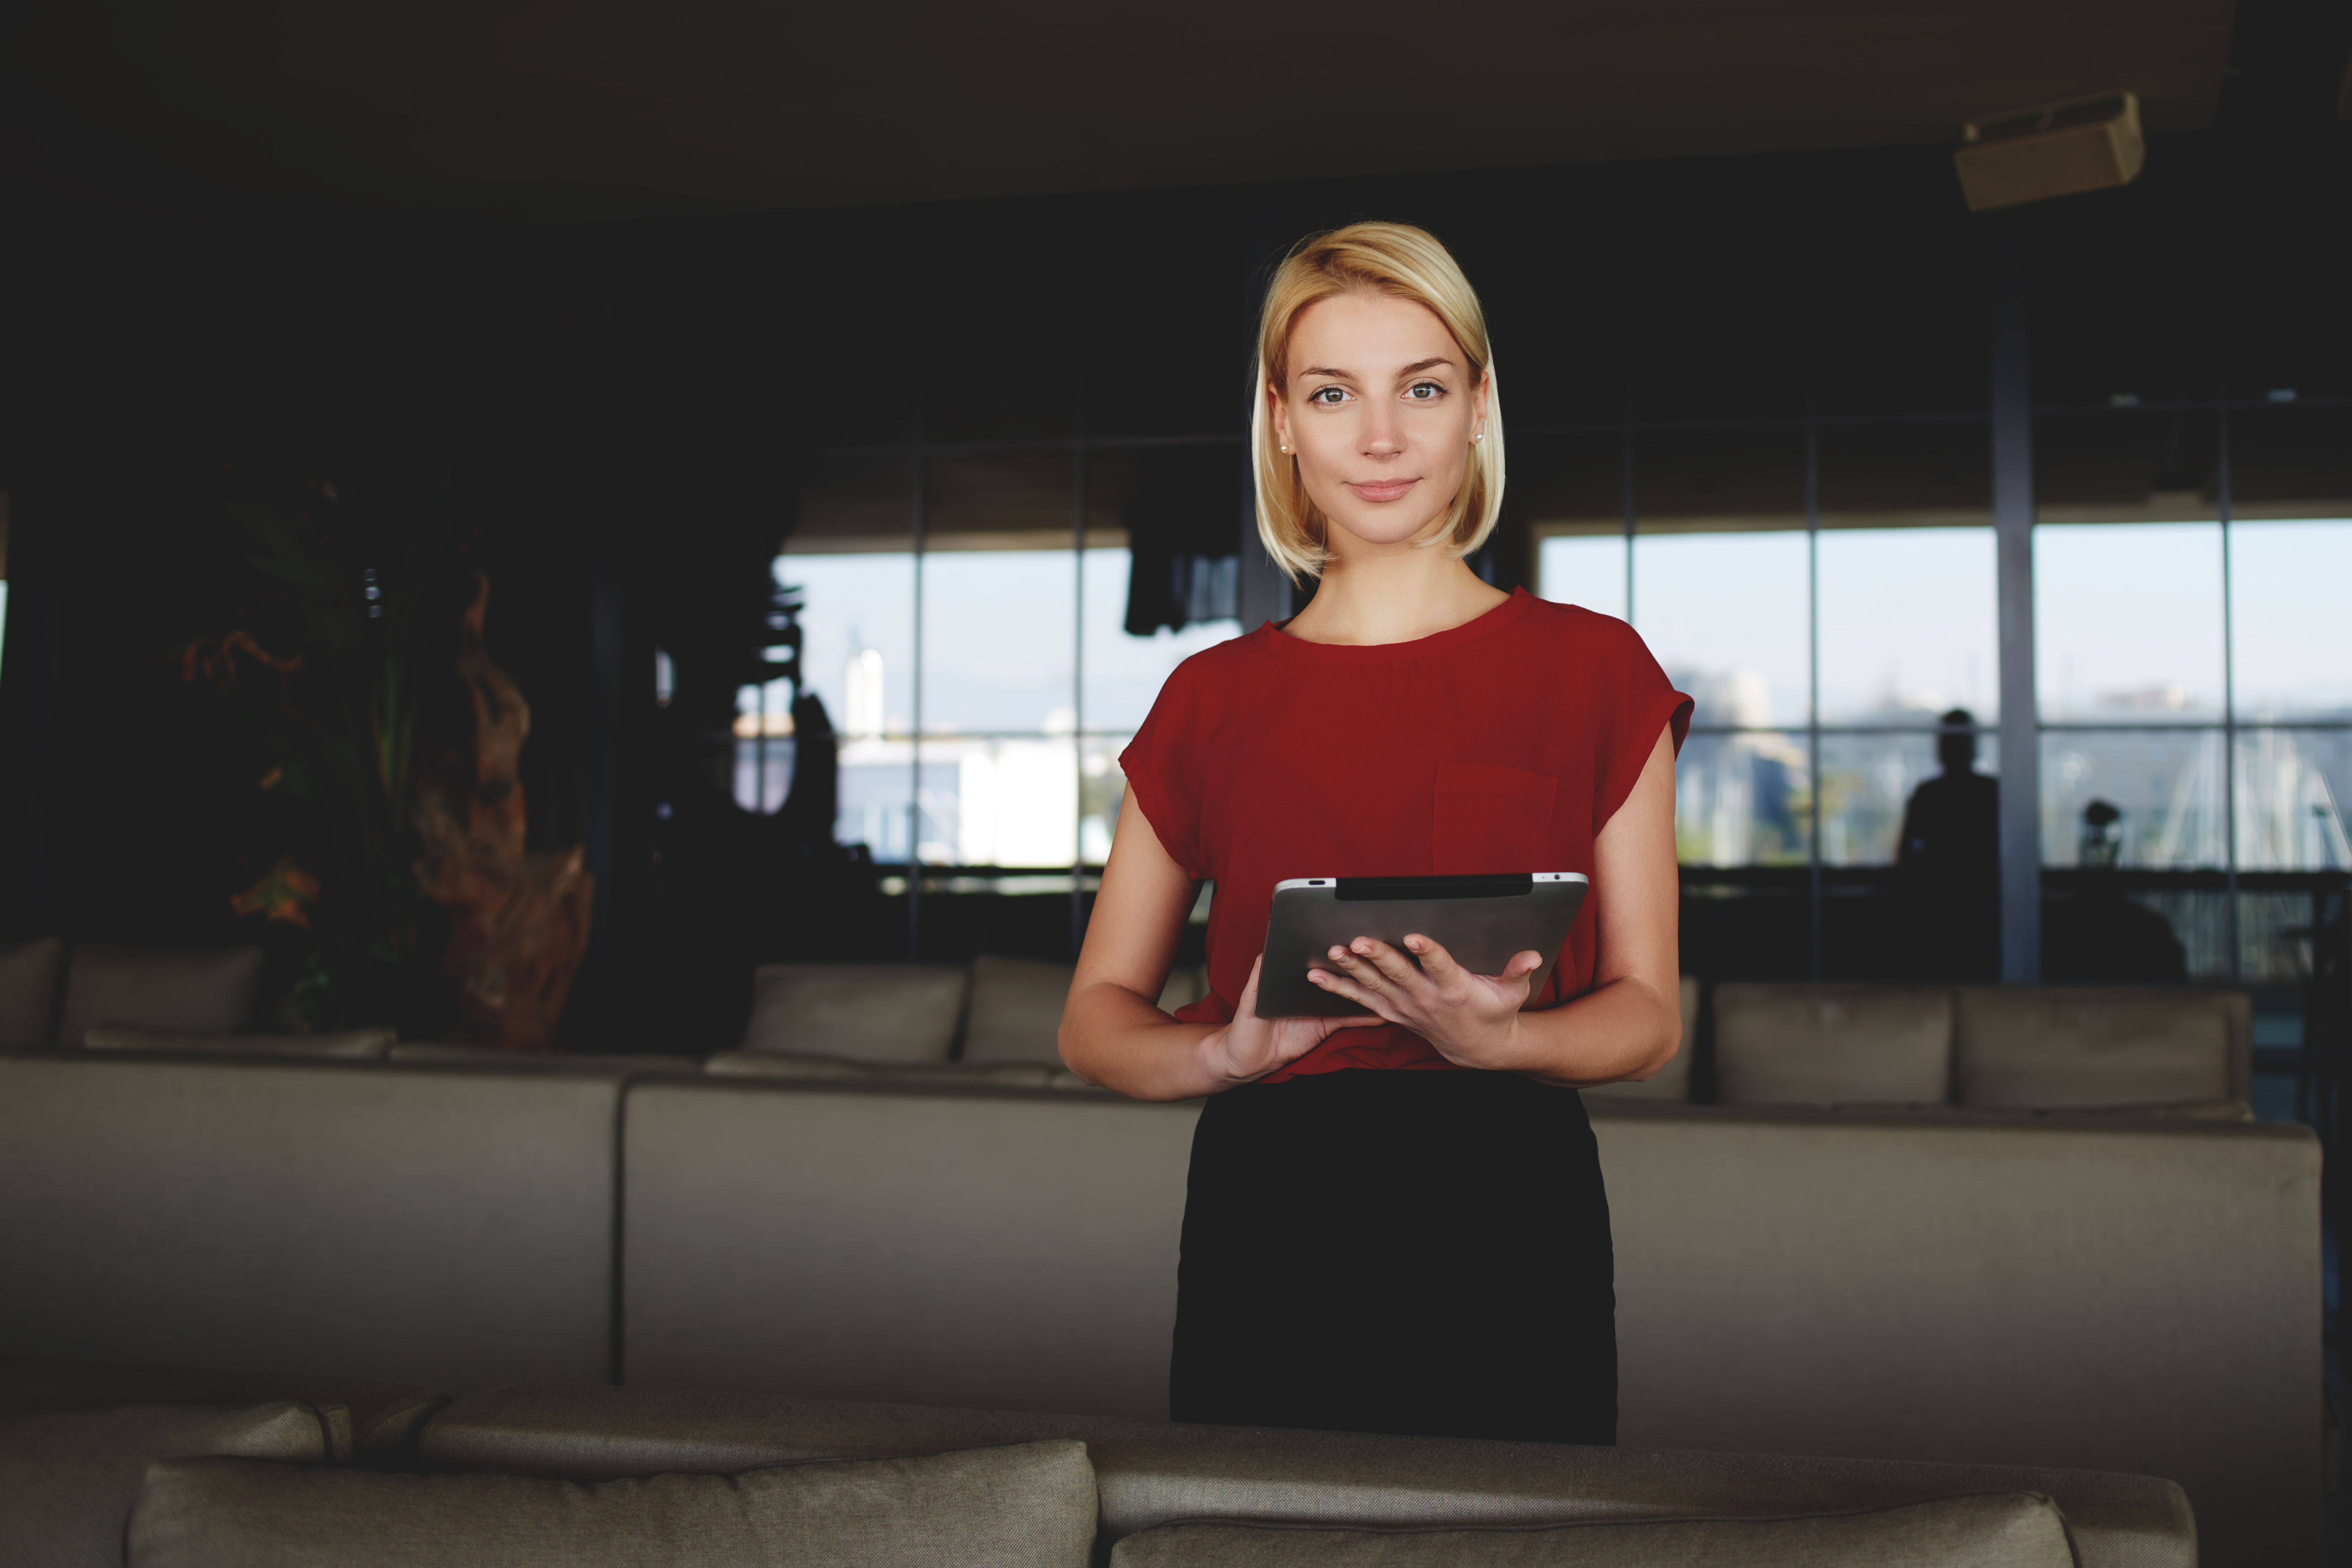 Young gorgeous businesswoman holding in hands digital tablet while standing in modern restaurant interior | Source: Shutterstock.com